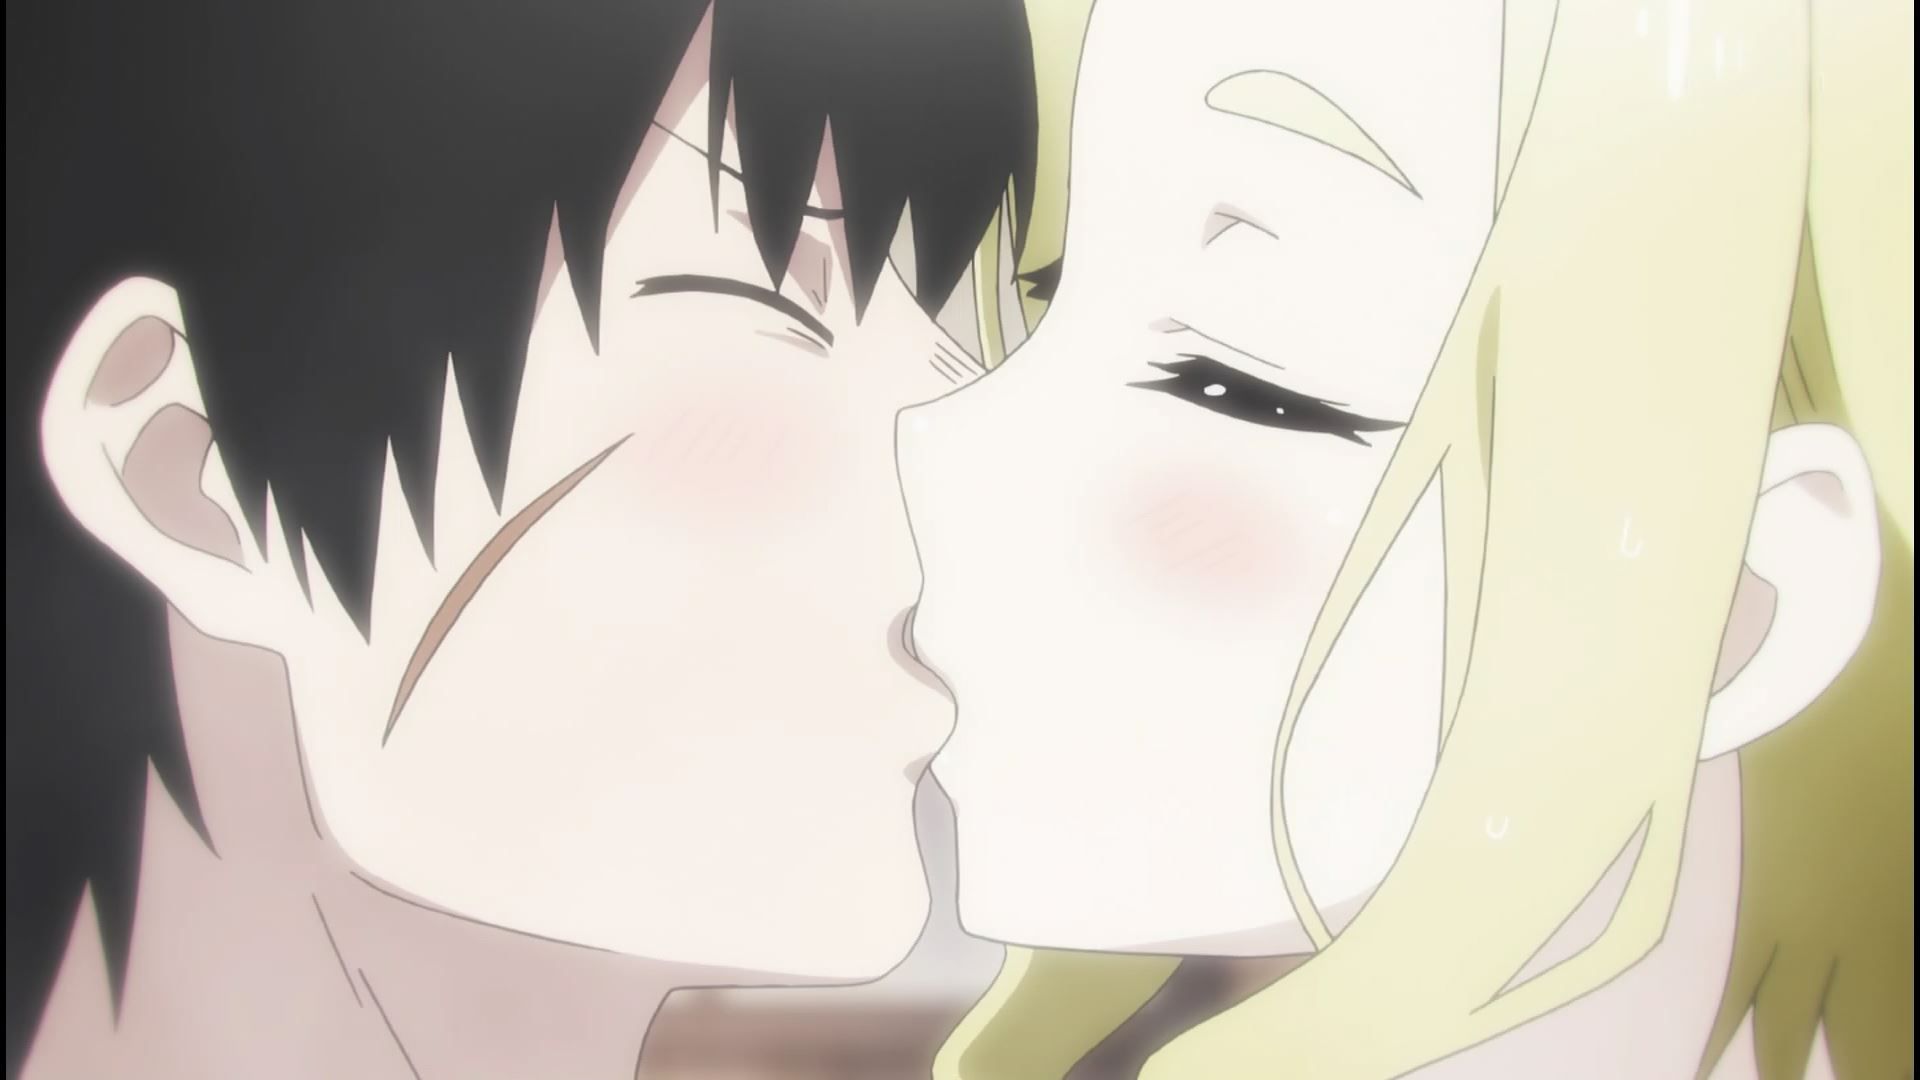 Anime [War x Love (Vallav)] In 11 episodes and become naked with girls and deep kiss or erotic scene! 17